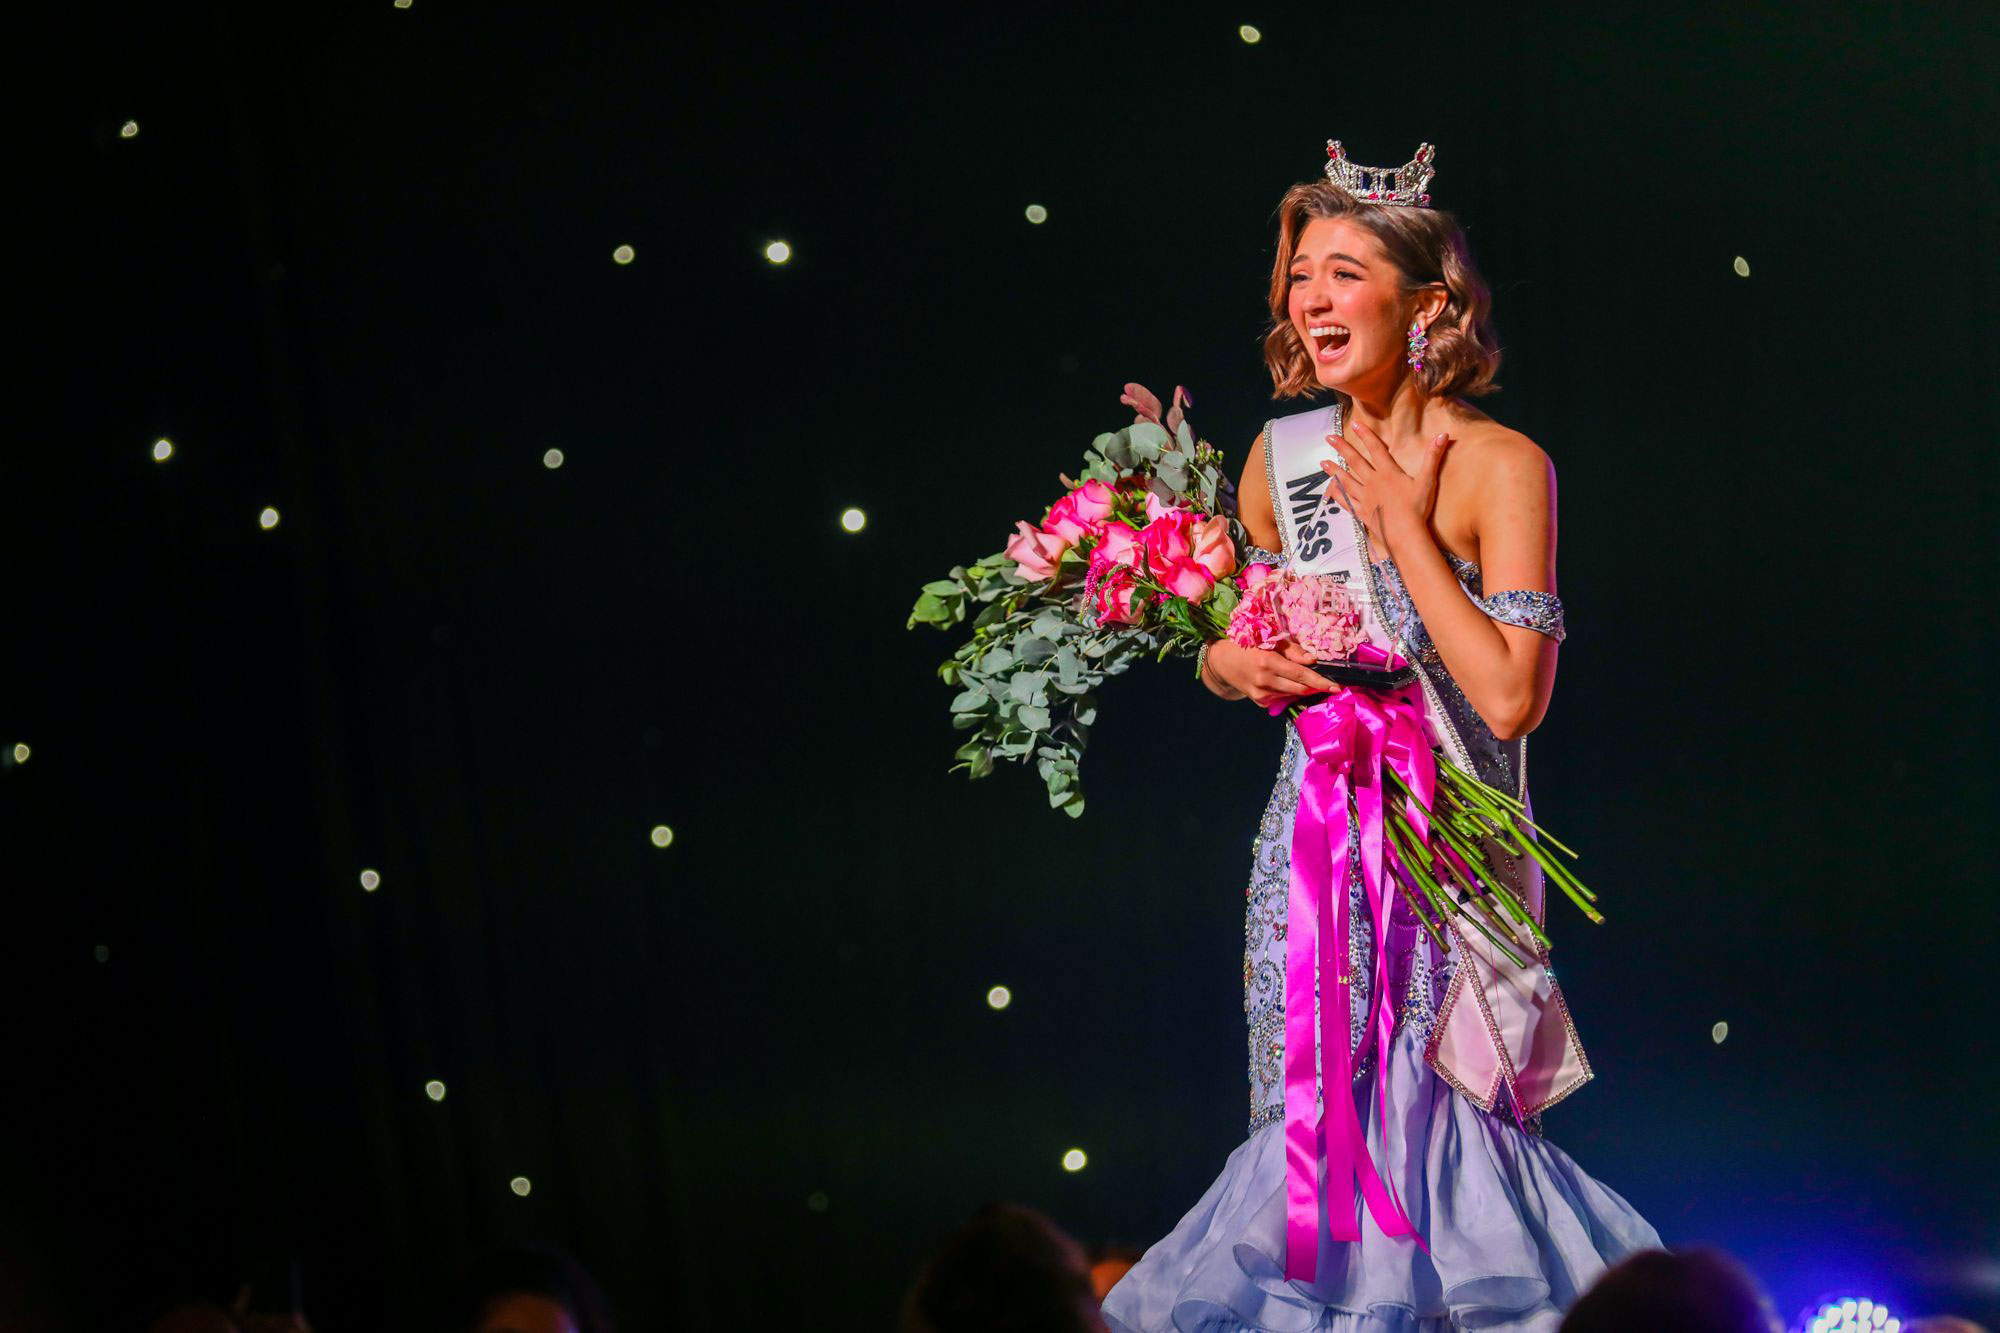 Miss America's Outstanding Teen Morgan Greco's crowning moment on stage